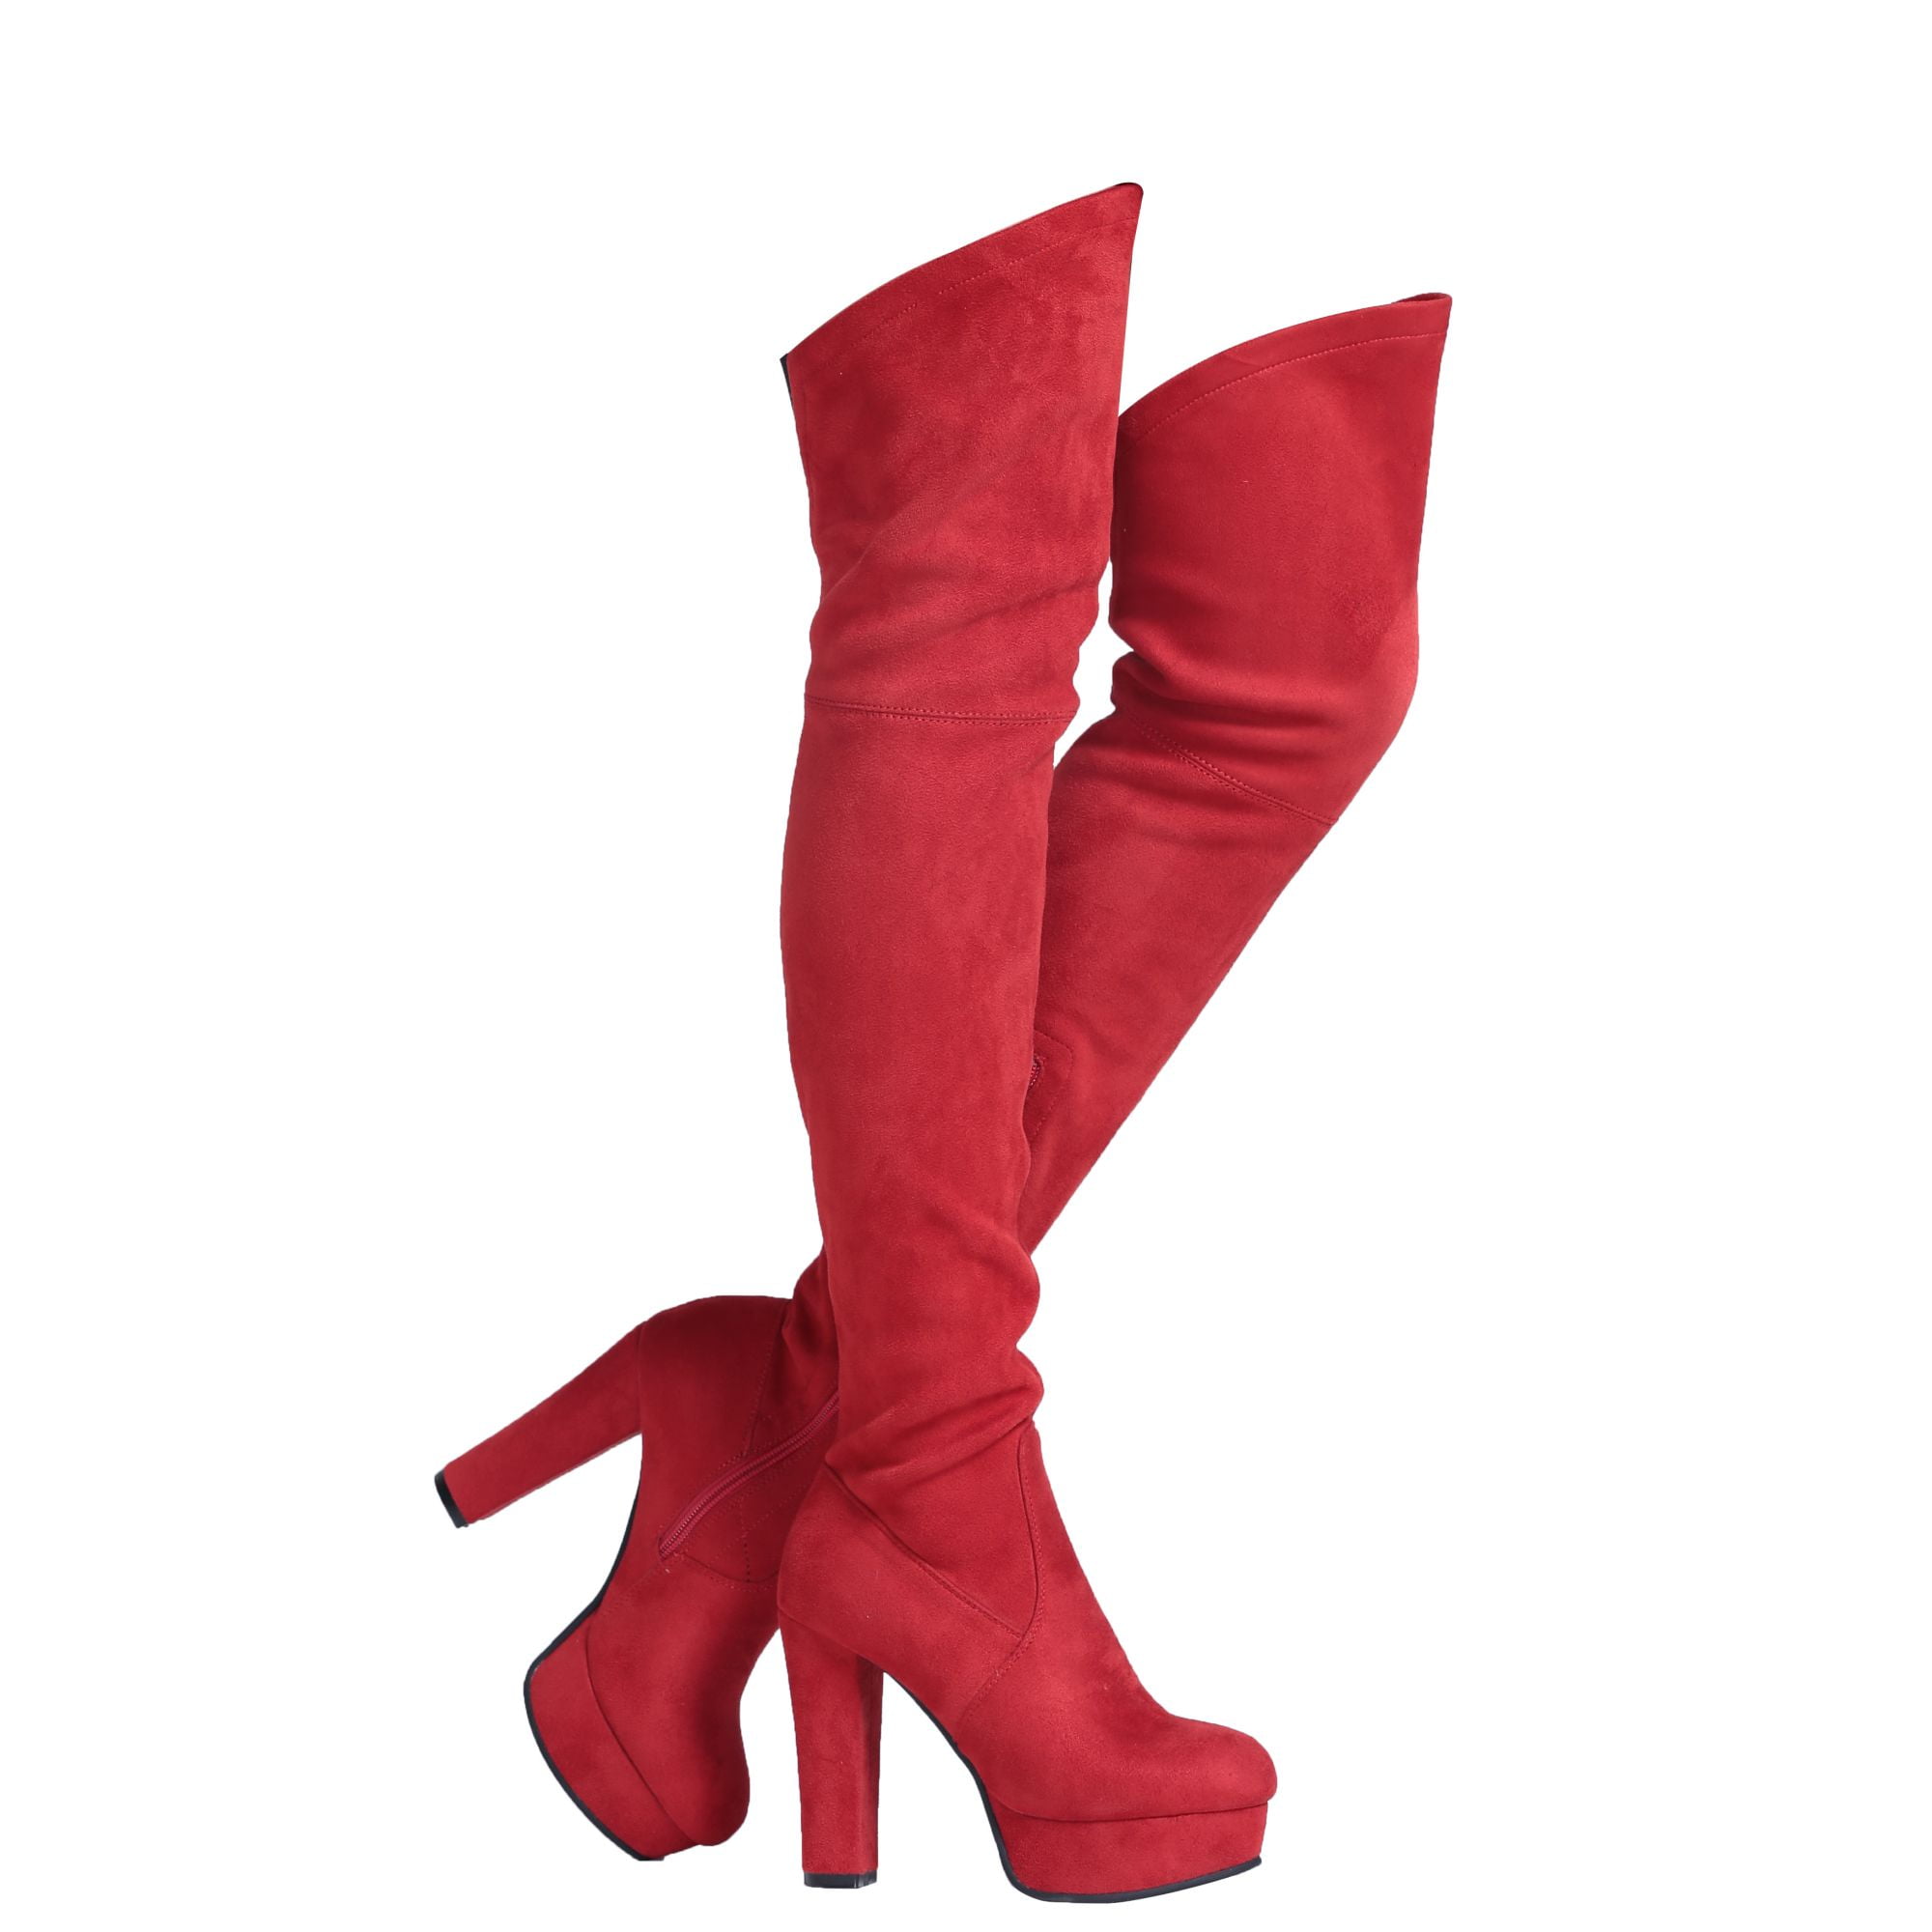 Shoe'N Tale Woman Suede Thigh High Over The Knee Boots - Walmart.com